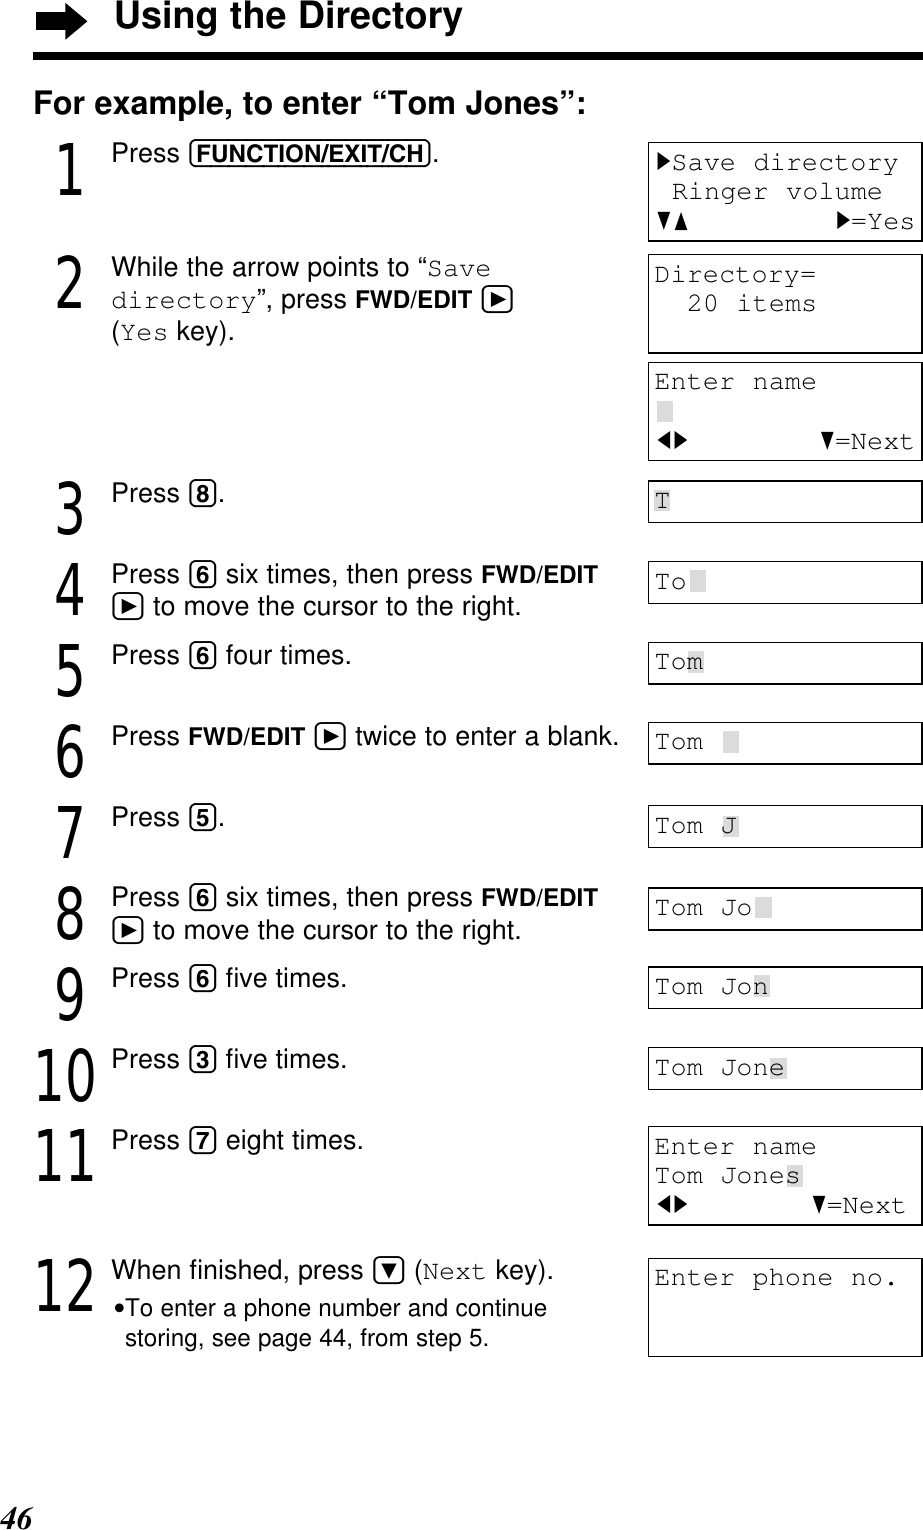 46For example, to enter “Tom Jones”:1Press (FUNCTION/EXIT/CH).2While the arrow points to “Savedirectory”, press FWD/EDIT á(Yes key).3Press (8).4Press (6) six times, then press FWD/EDITáto move the cursor to the right.5Press (6) four times.6Press FWD/EDIT átwice to enter a blank.7Press (5).8Press (6) six times, then press FWD/EDITáto move the cursor to the right.9Press (6) ﬁve times.10Press (3) ﬁve times.11Press (7) eight times.12When ﬁnished, press Ö(Next key).•To enter a phone number and continuestoring, see page 44, from step 5.Enter nameTom JonesIH G=NextTToTomTom Tom JTom JoTom JonTom JoneDirectory=20 itemsEnter nameIH G=NextEnter phone no.HSave directoryRinger volumeGF H=YesUsing the Directory